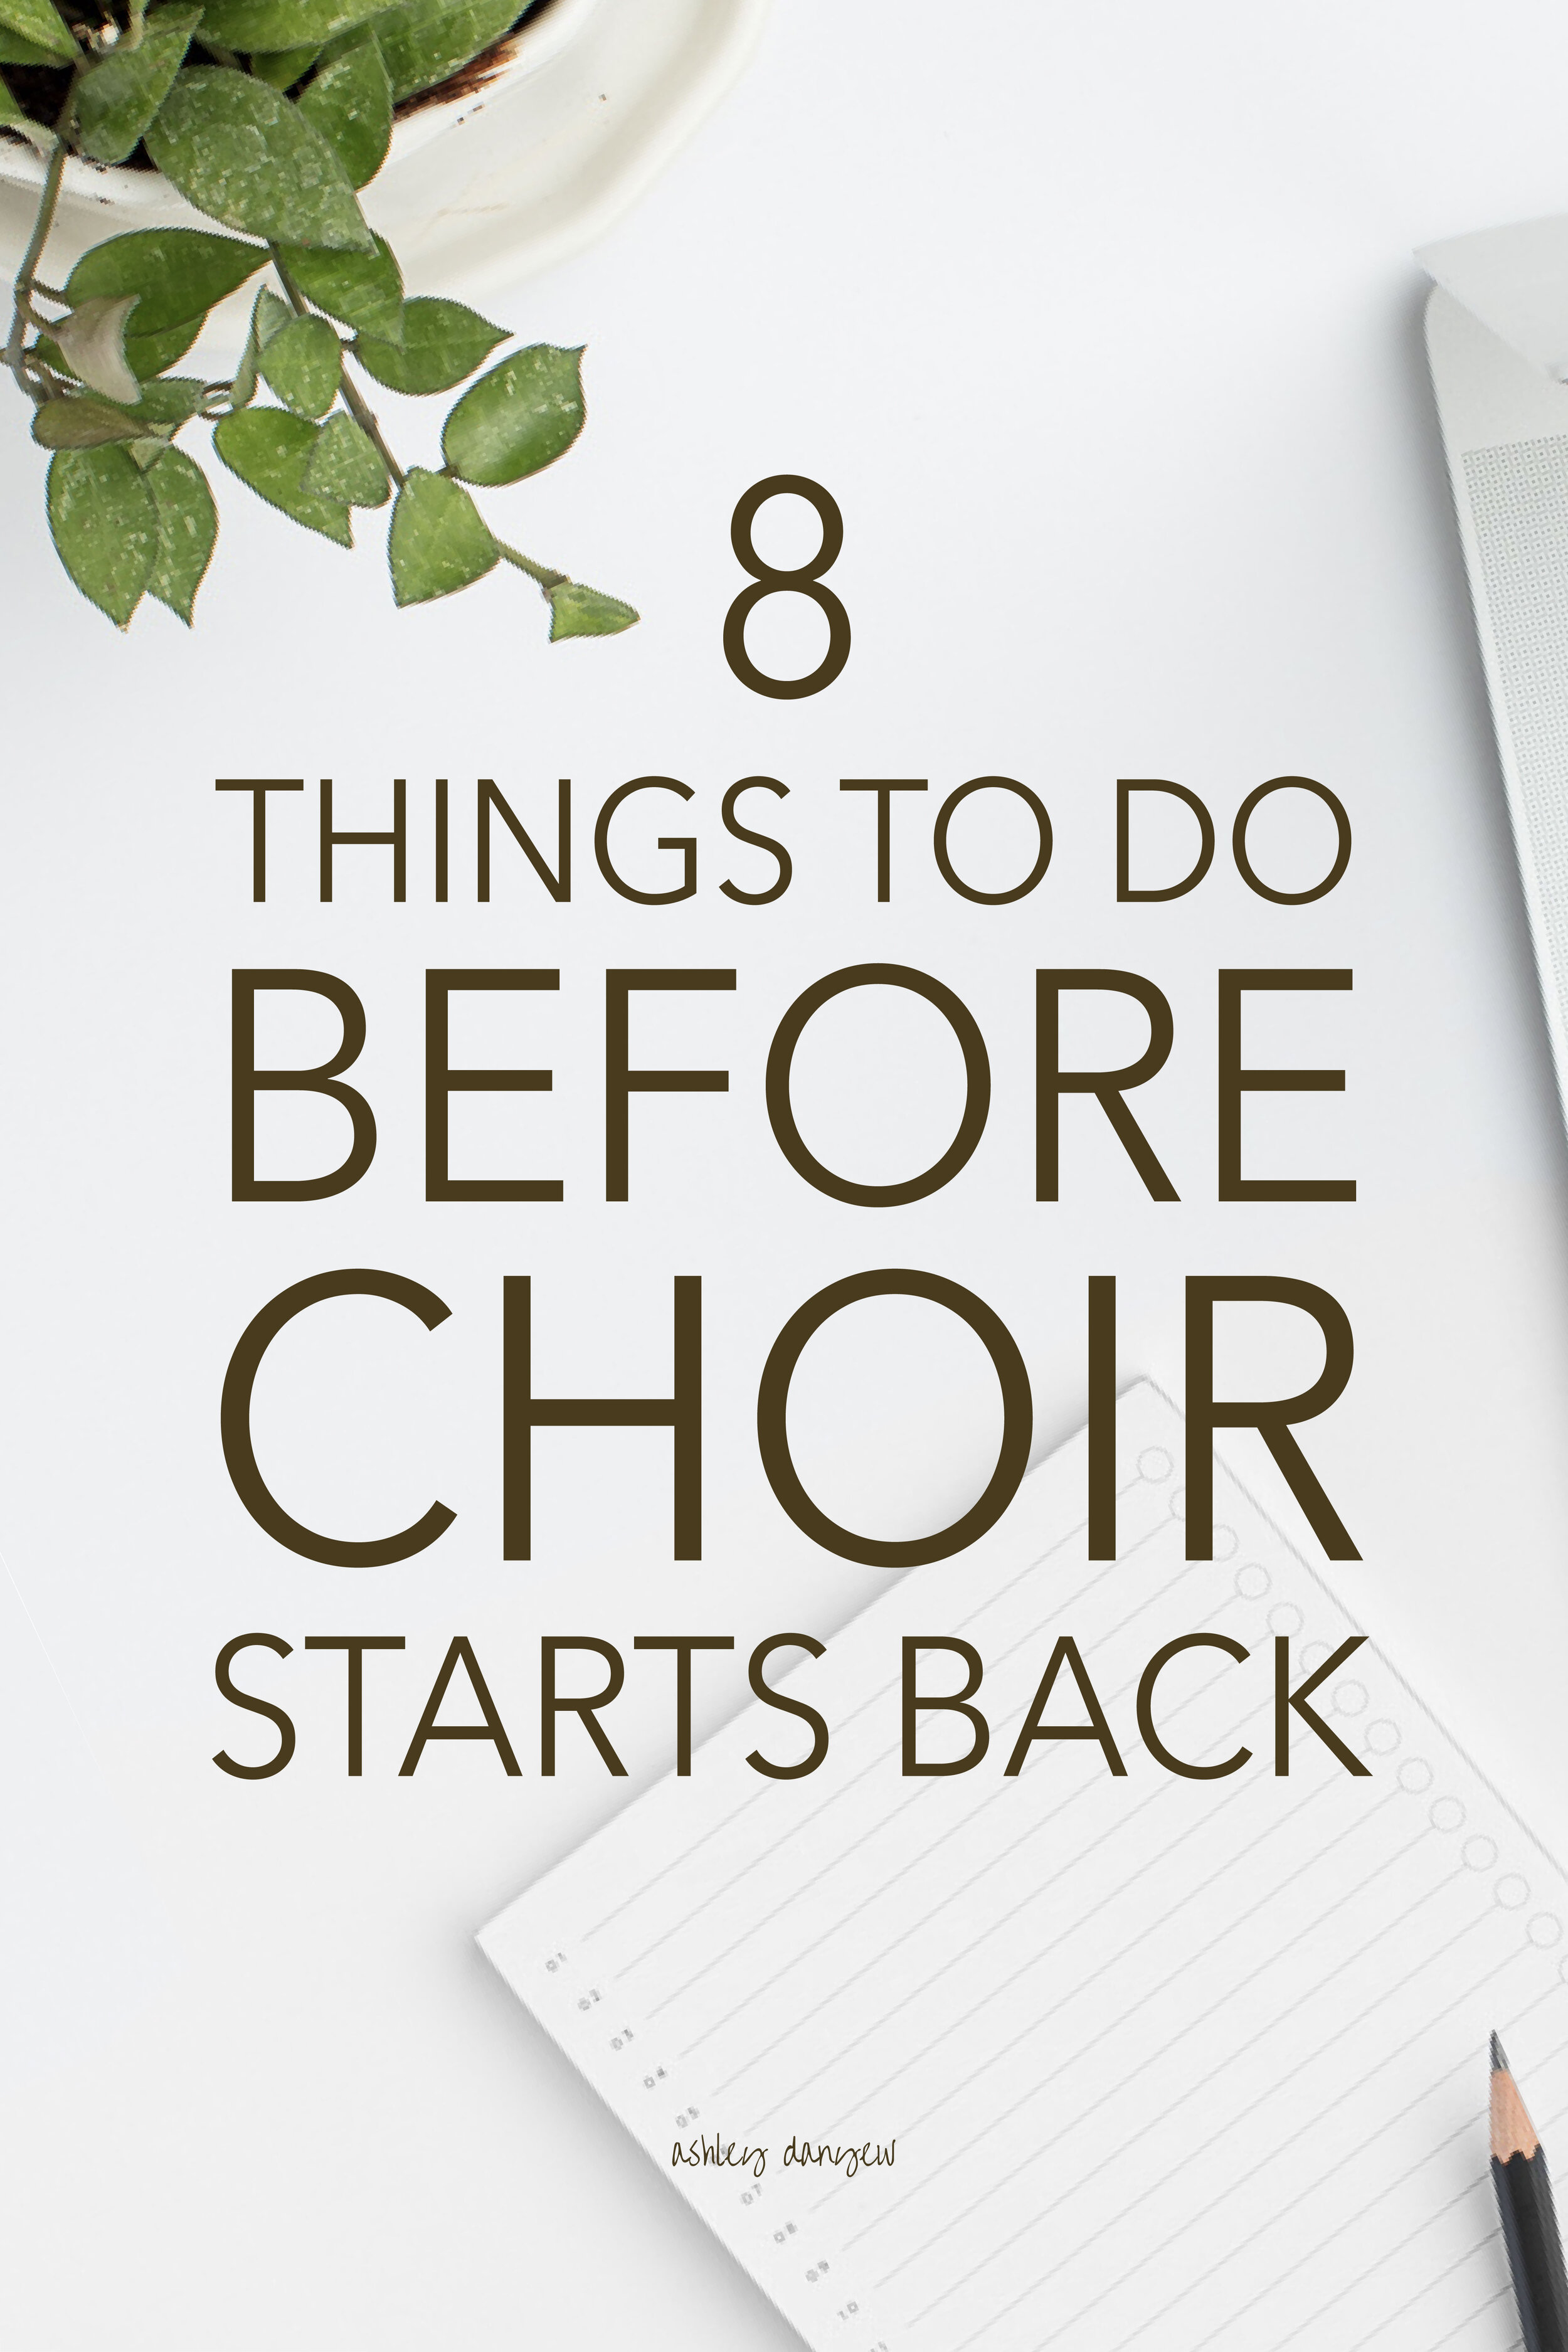 8 Things to Do Before Choir Starts Back